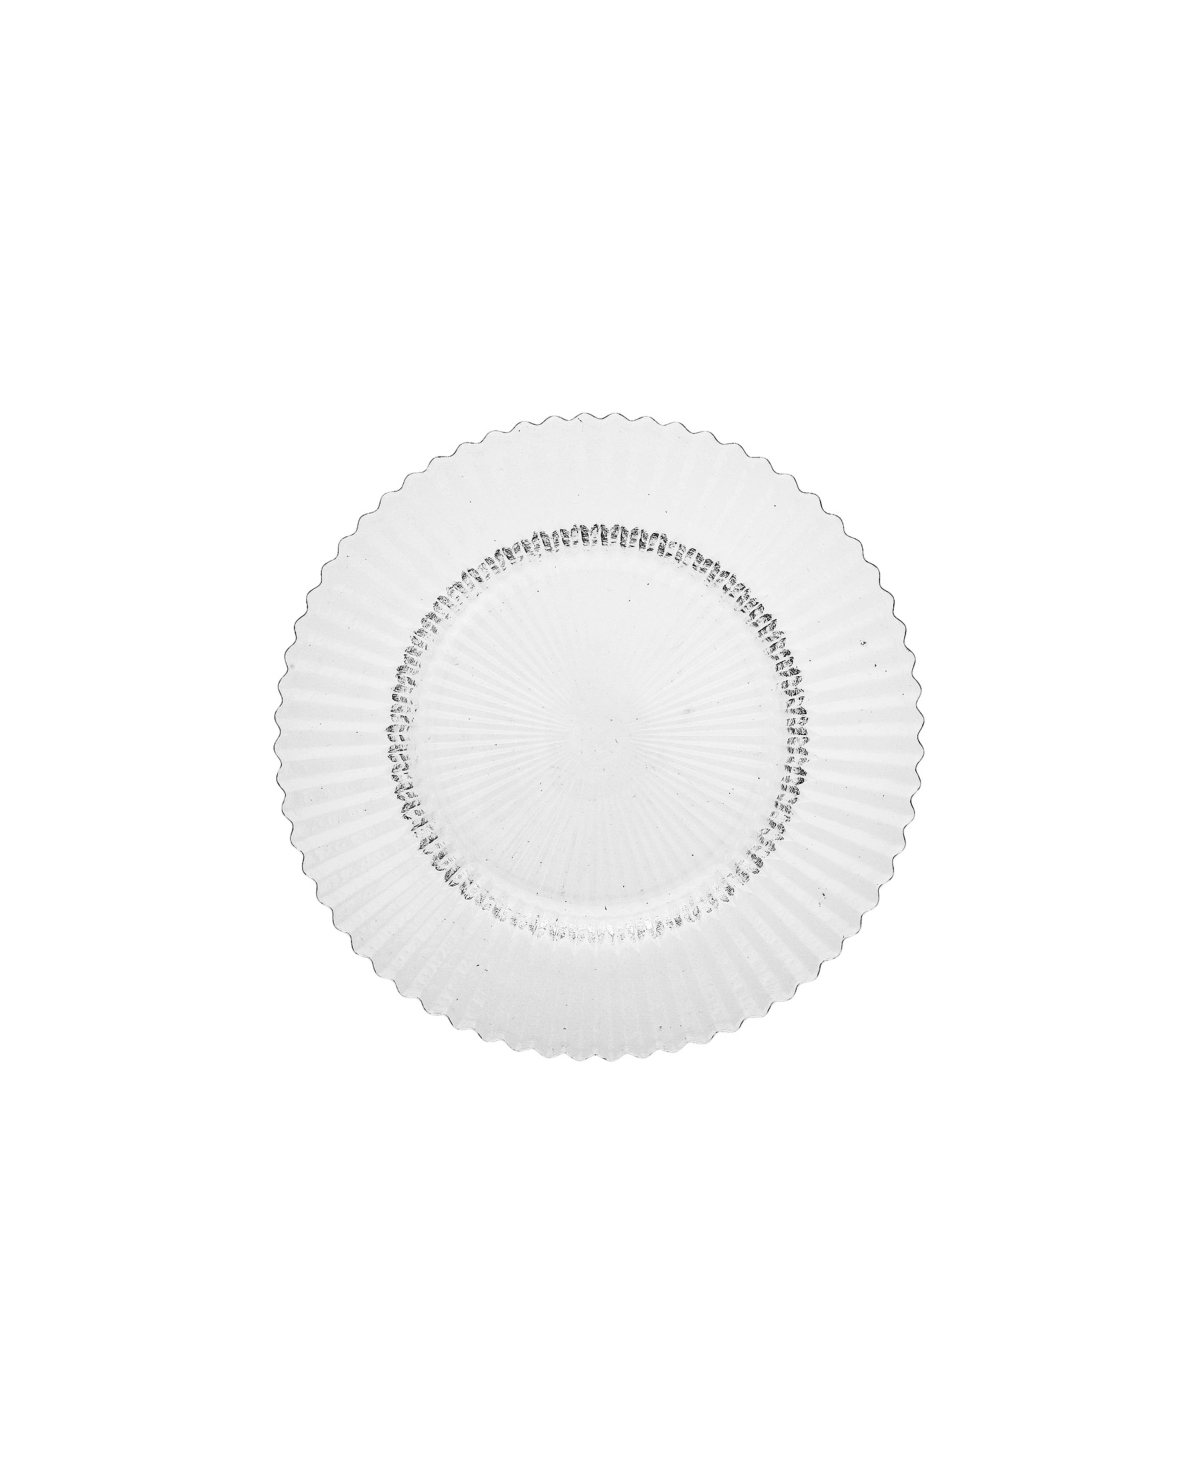 Archie Salad Plates, Set of 4 - Clear